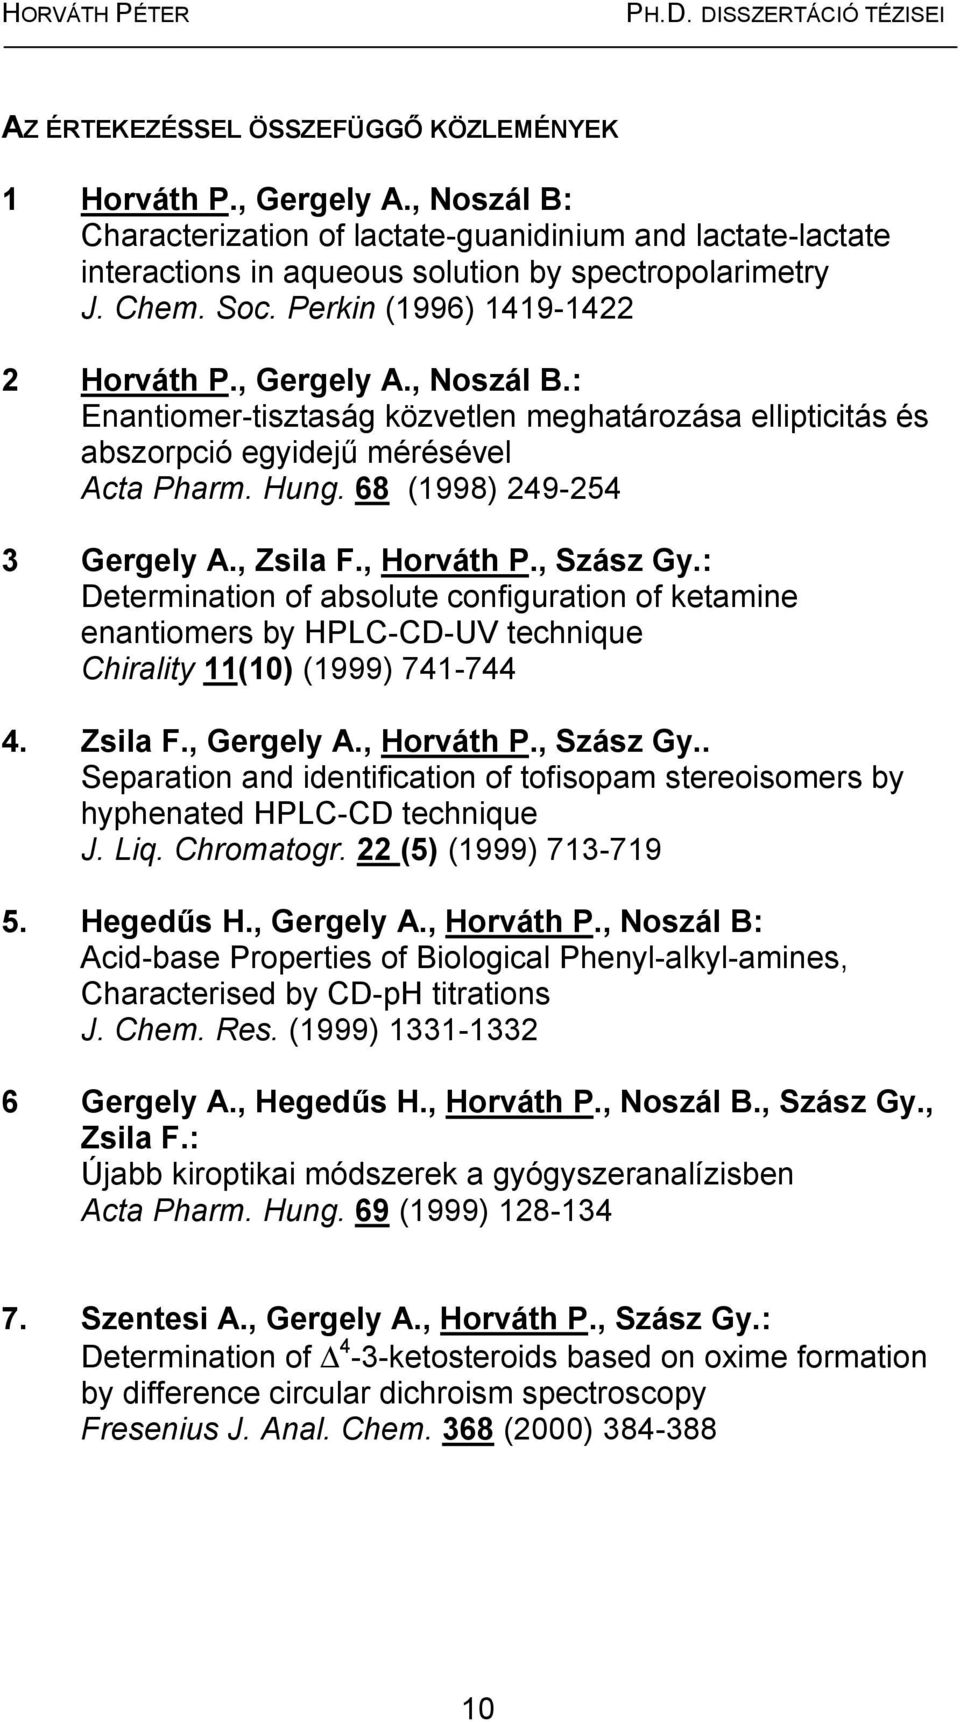 68 (1998) 249-254 3 Gergely A., Zsila F., Horváth P., Szász Gy.: Determination of absolute configuration of ketamine enantiomers by HPLC-CD-UV technique Chirality 11(10) (1999) 741-744 149 4. Zsila F., Gergely A.